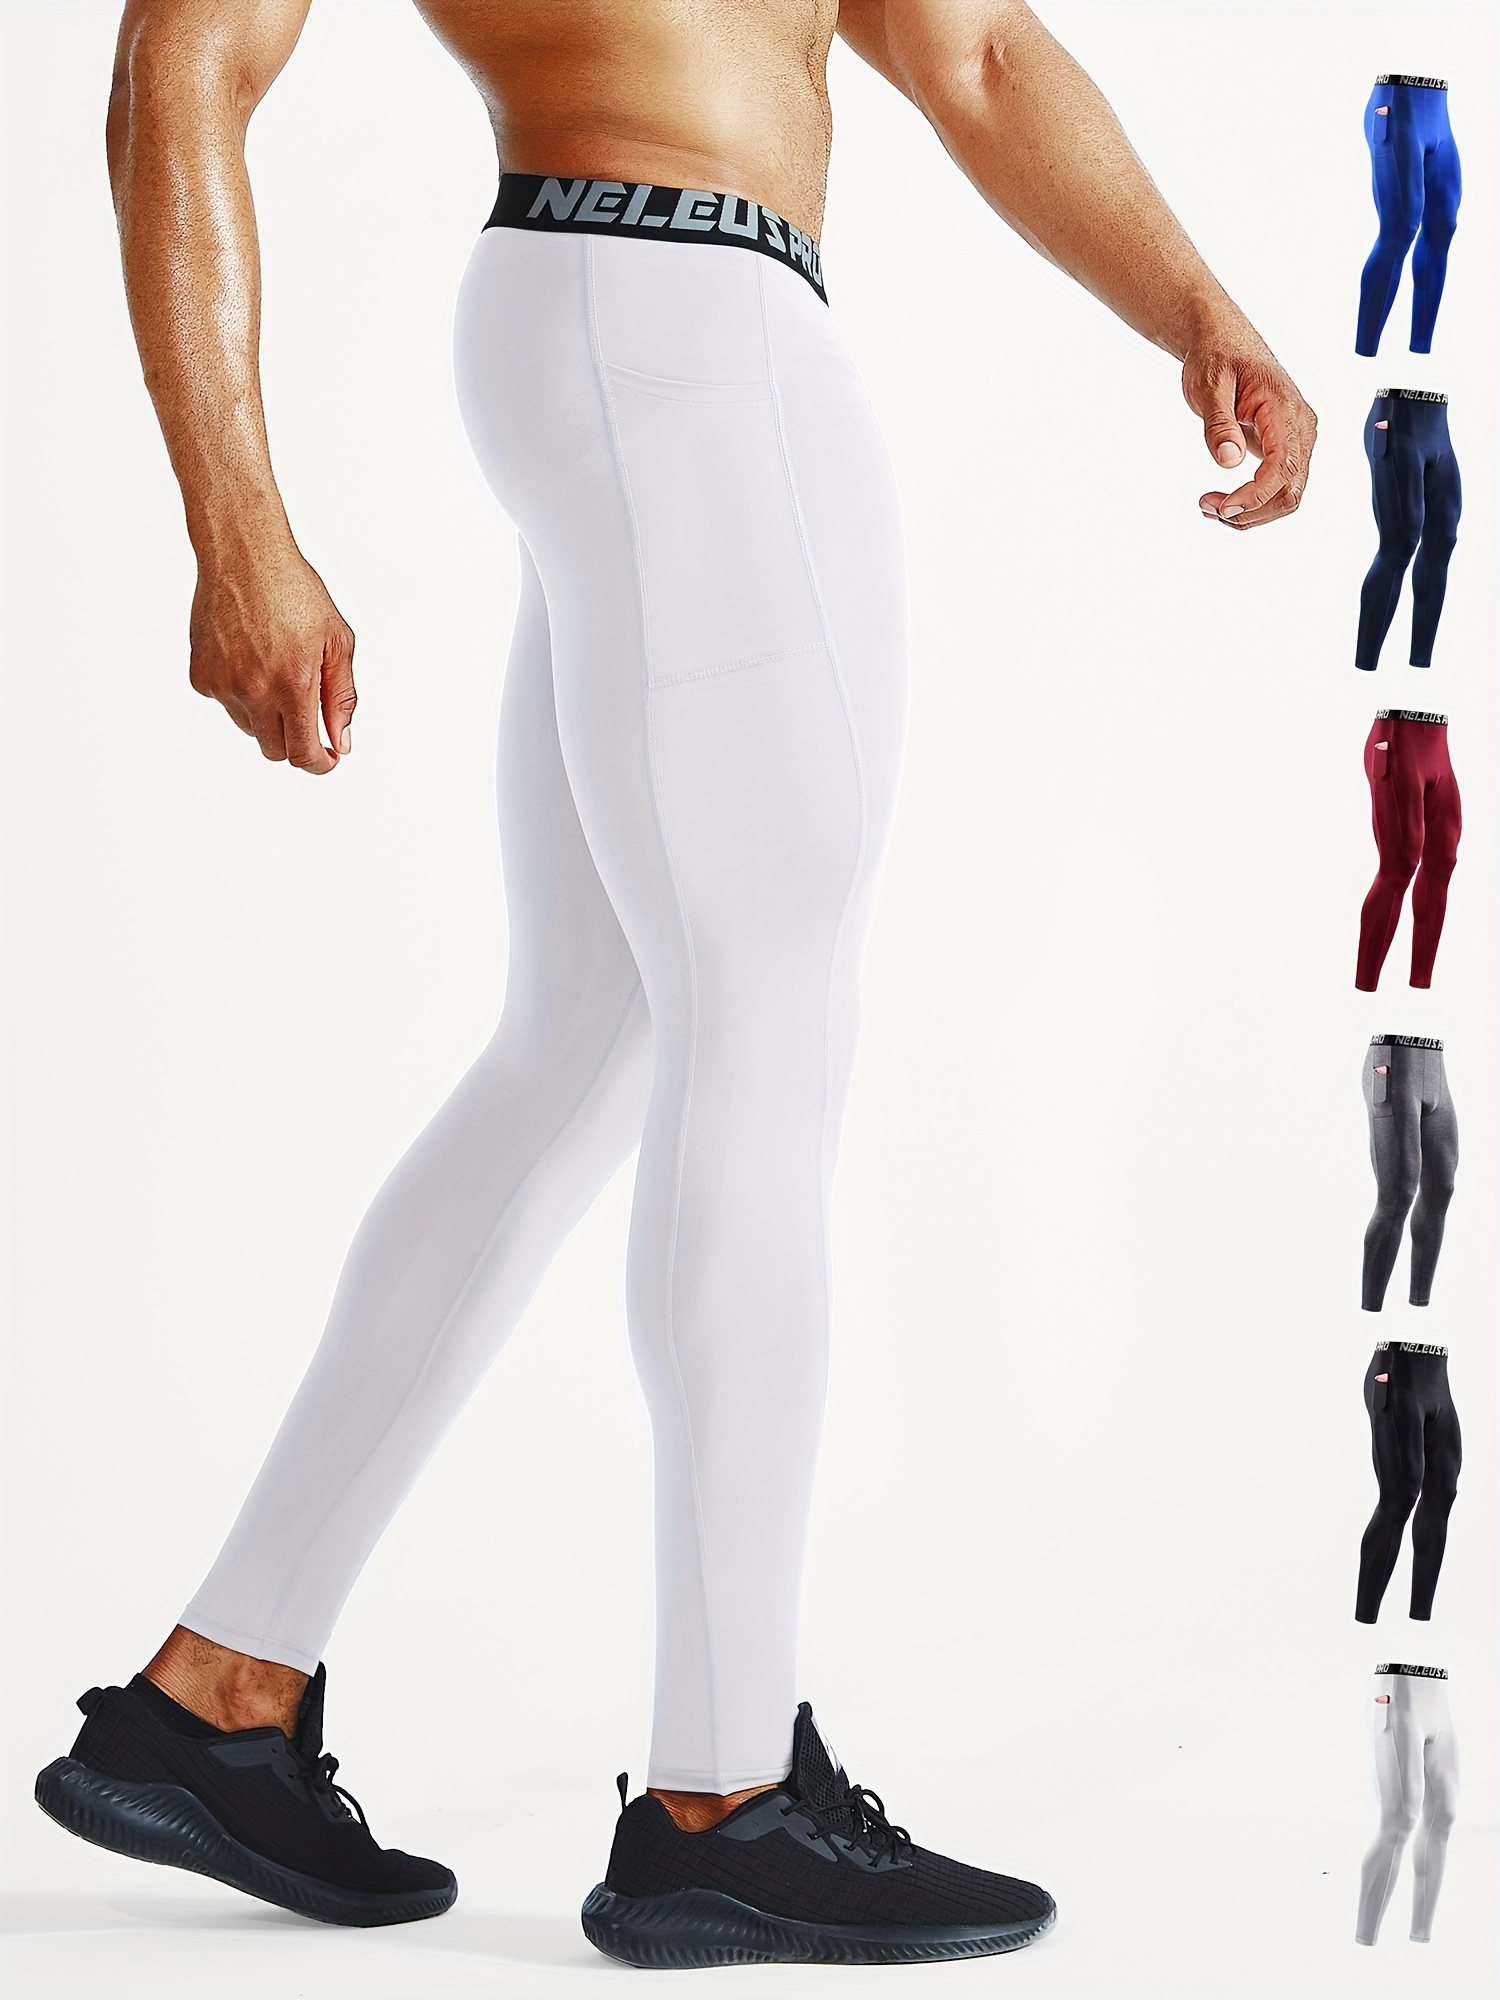 Mens Quick Dry Shorts For Outdoor Fitness, Running, Basketball, And  Training Tight Stretch Leggings Under Shorts For Exercise And Sports From  Fedoradie, $13.41